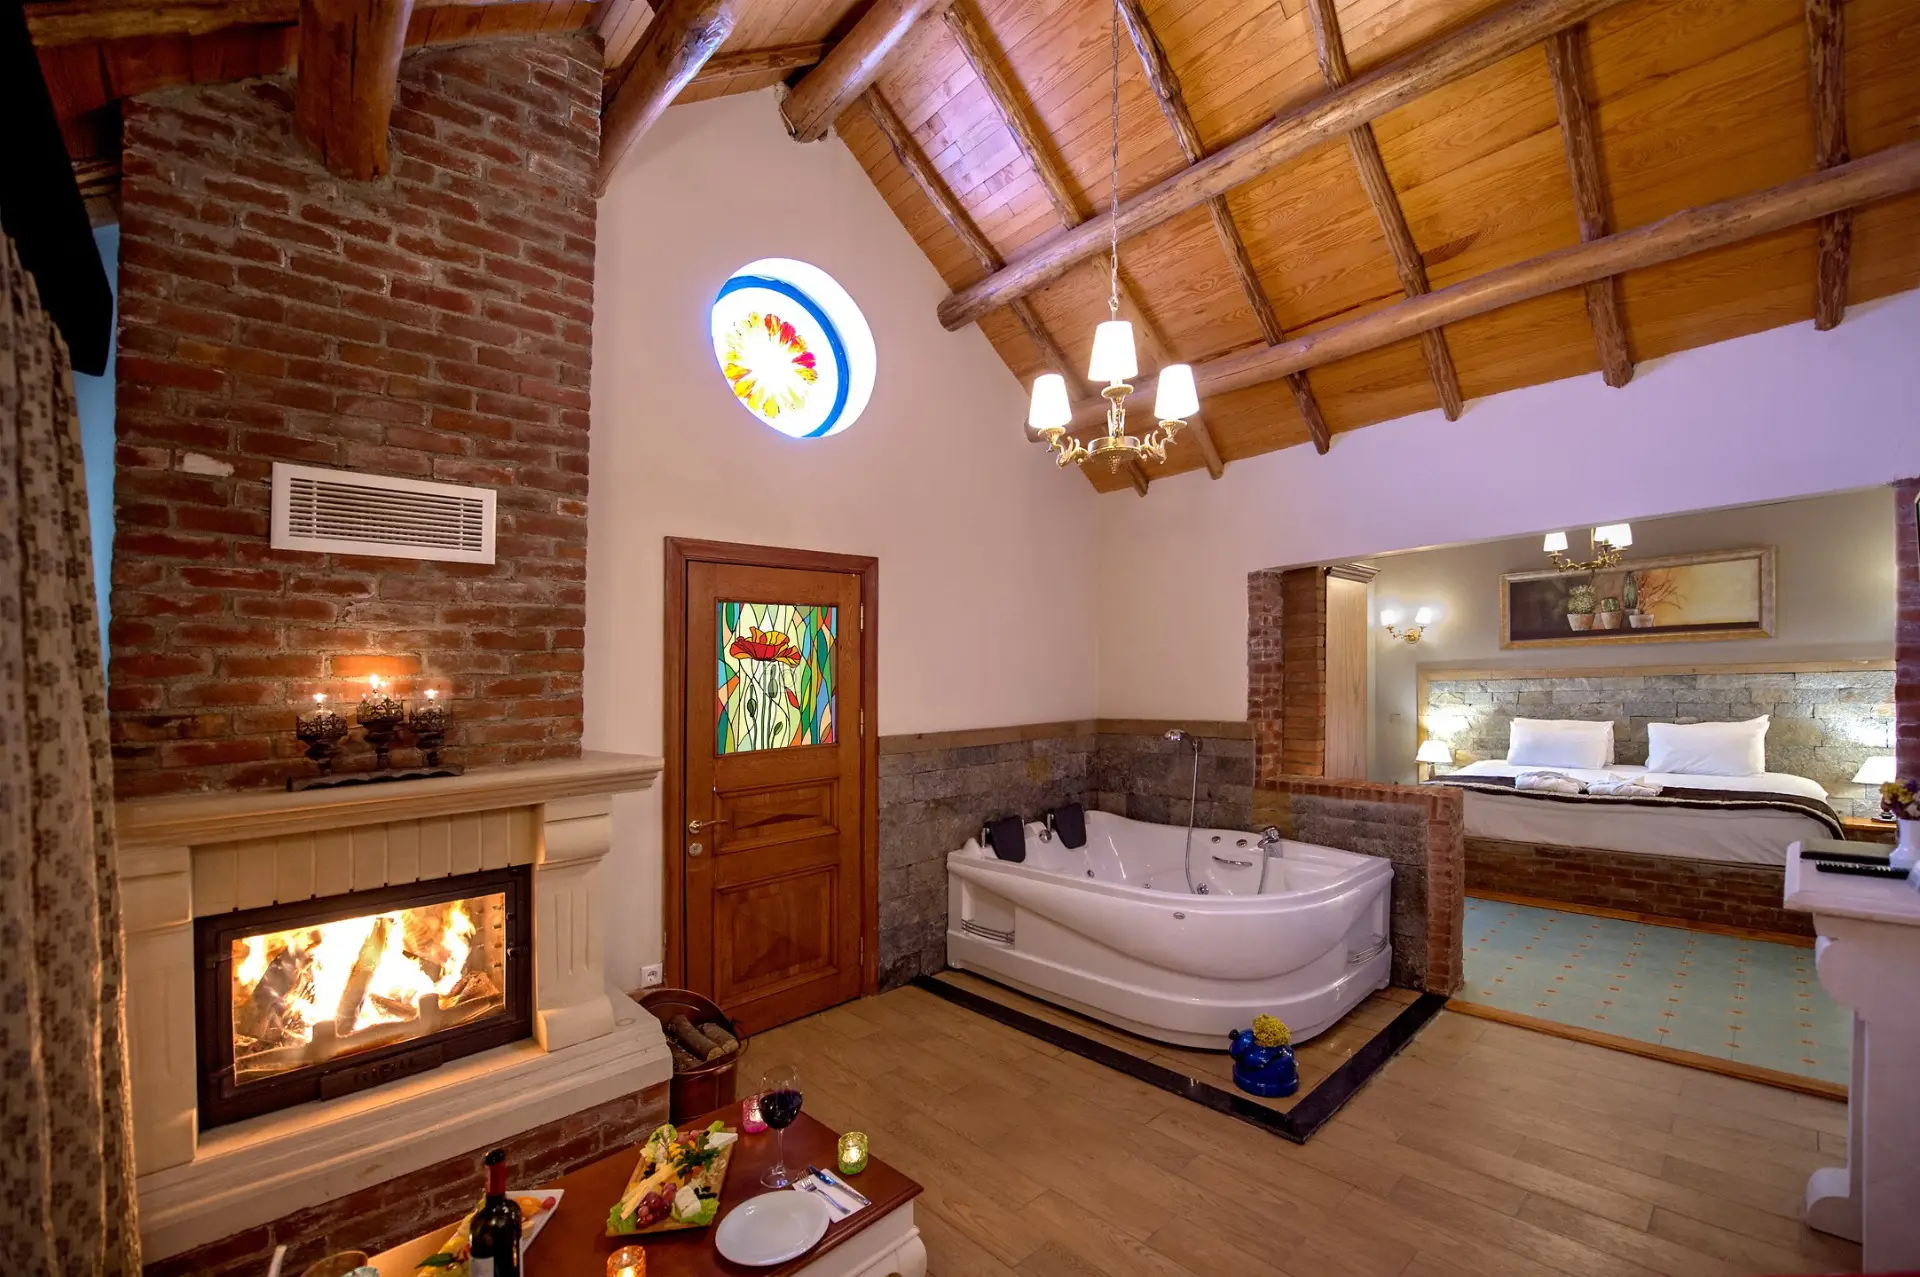 Top 10 Hotels with Fireplace in the Room